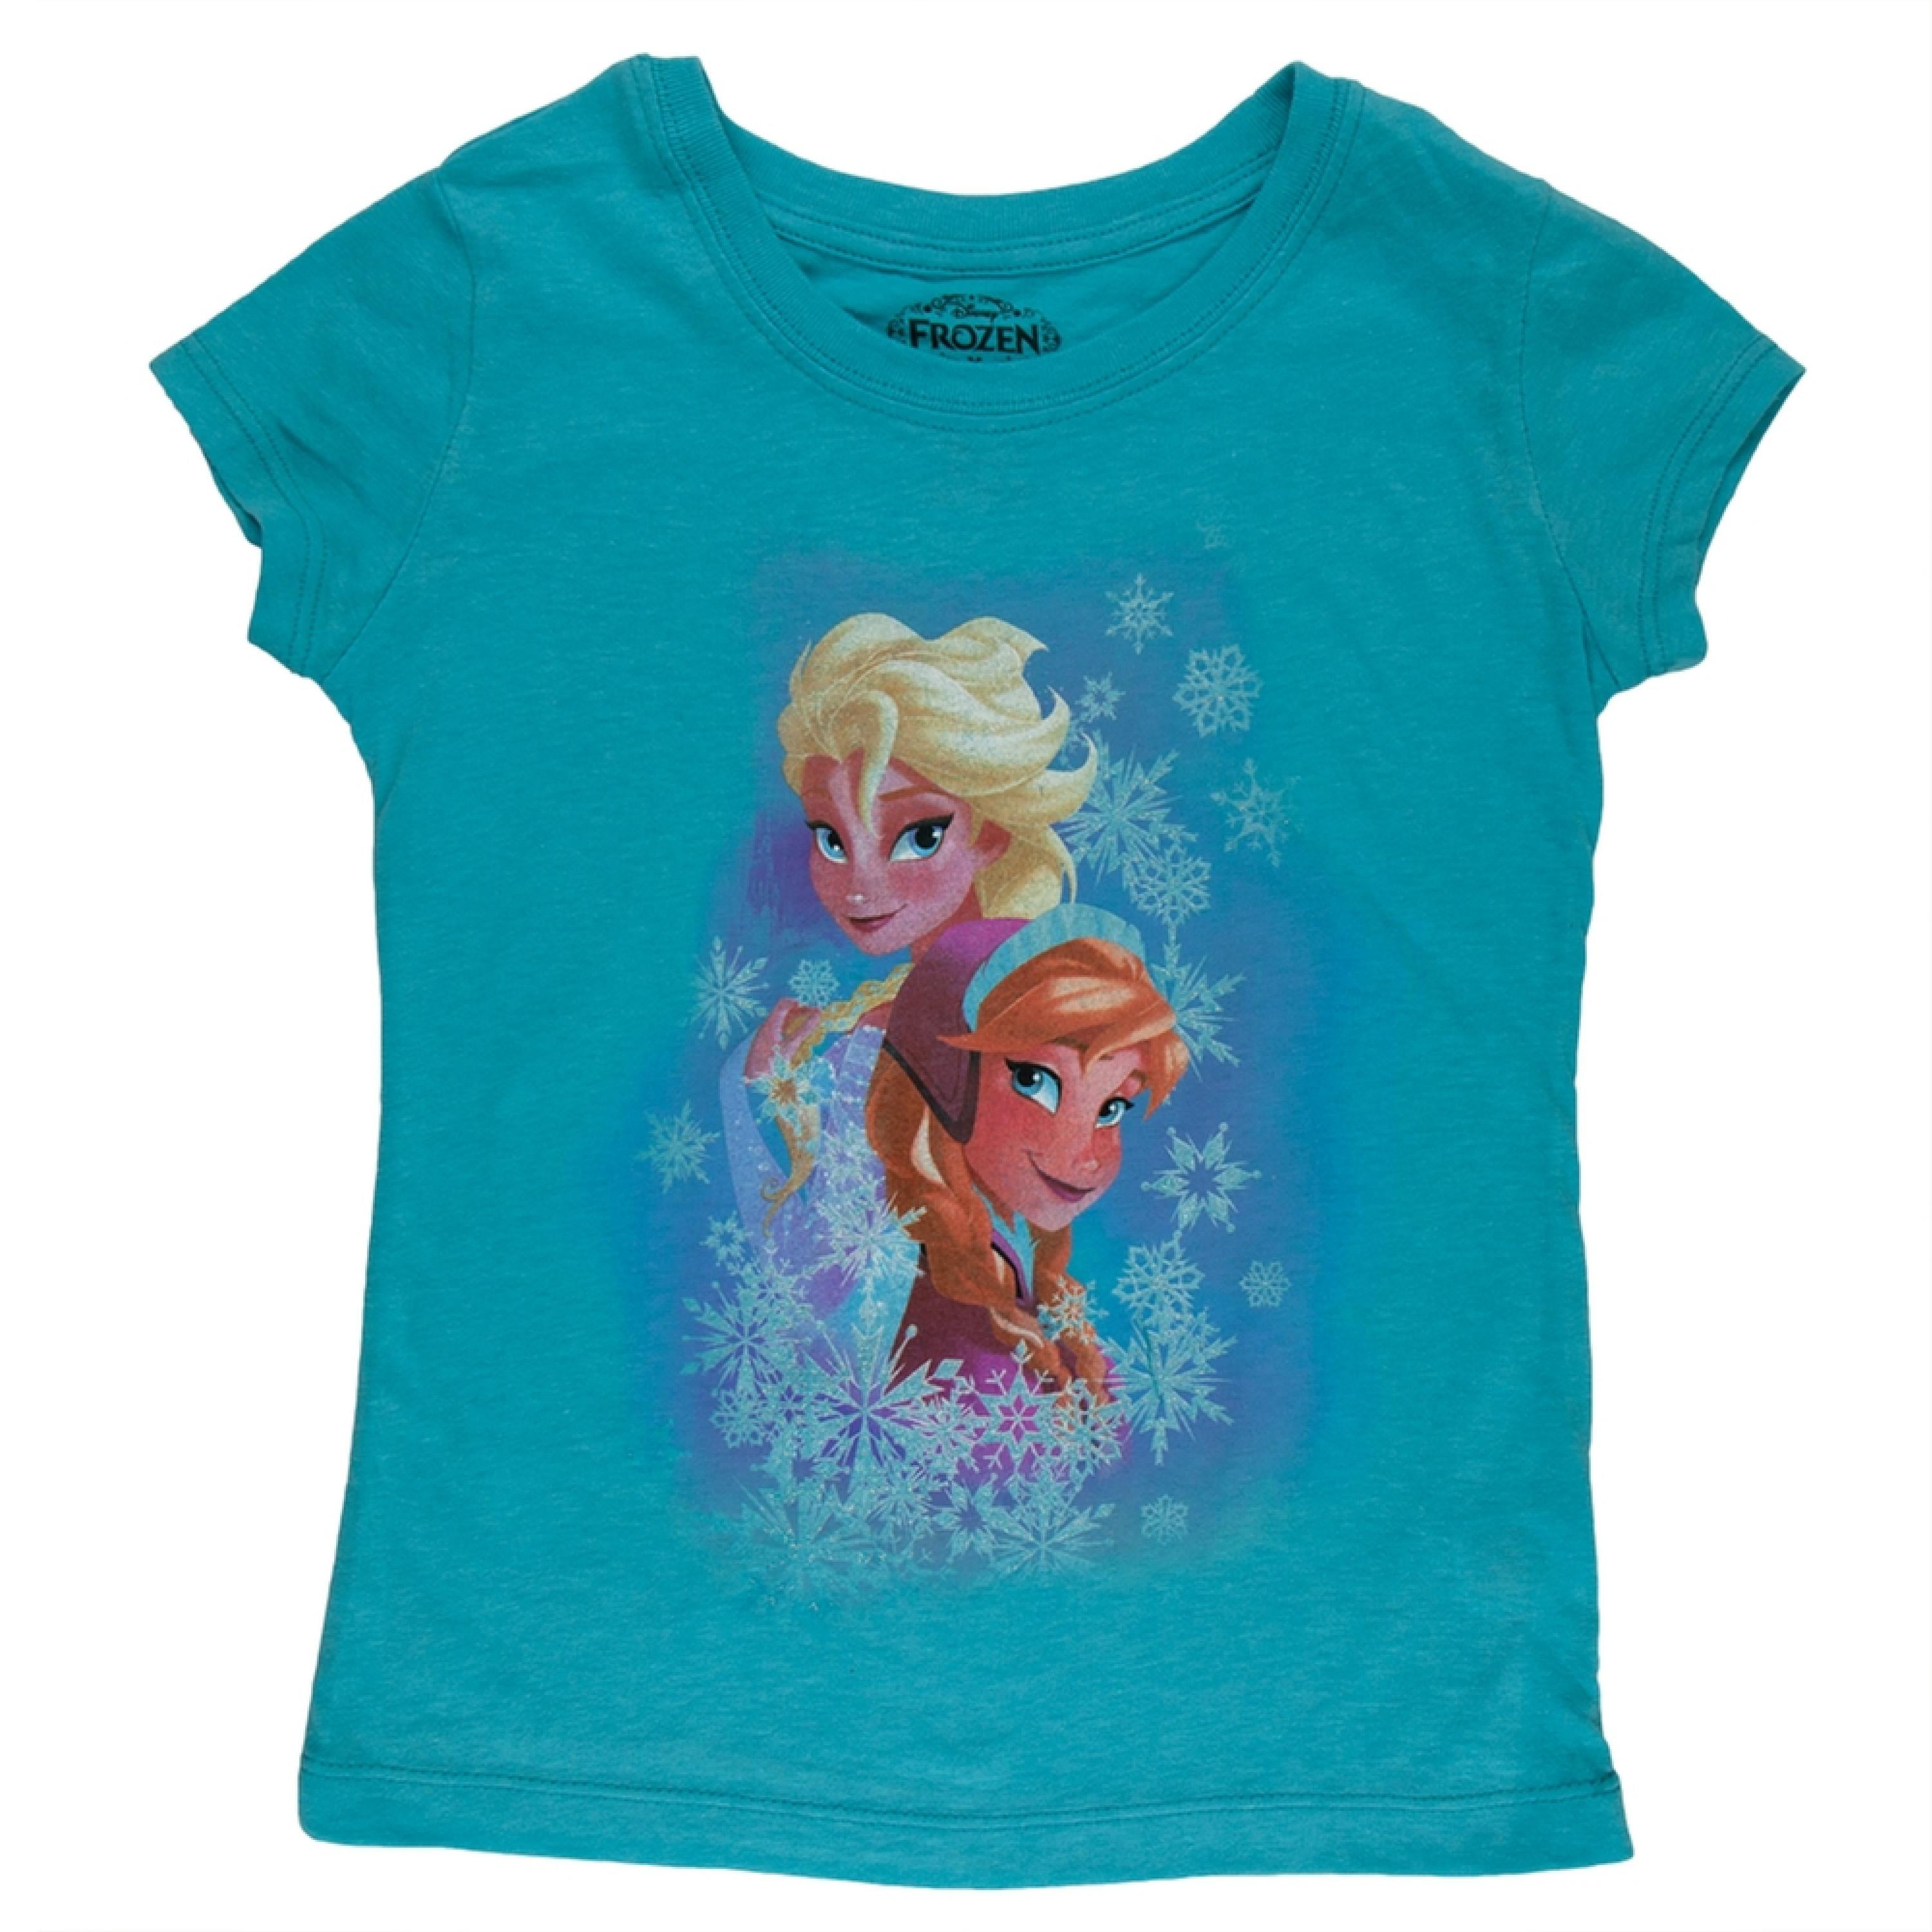 Frozen - Elsa and Anna Snow Collage Girls Juvy T-Shirt - Juvy 6X ...